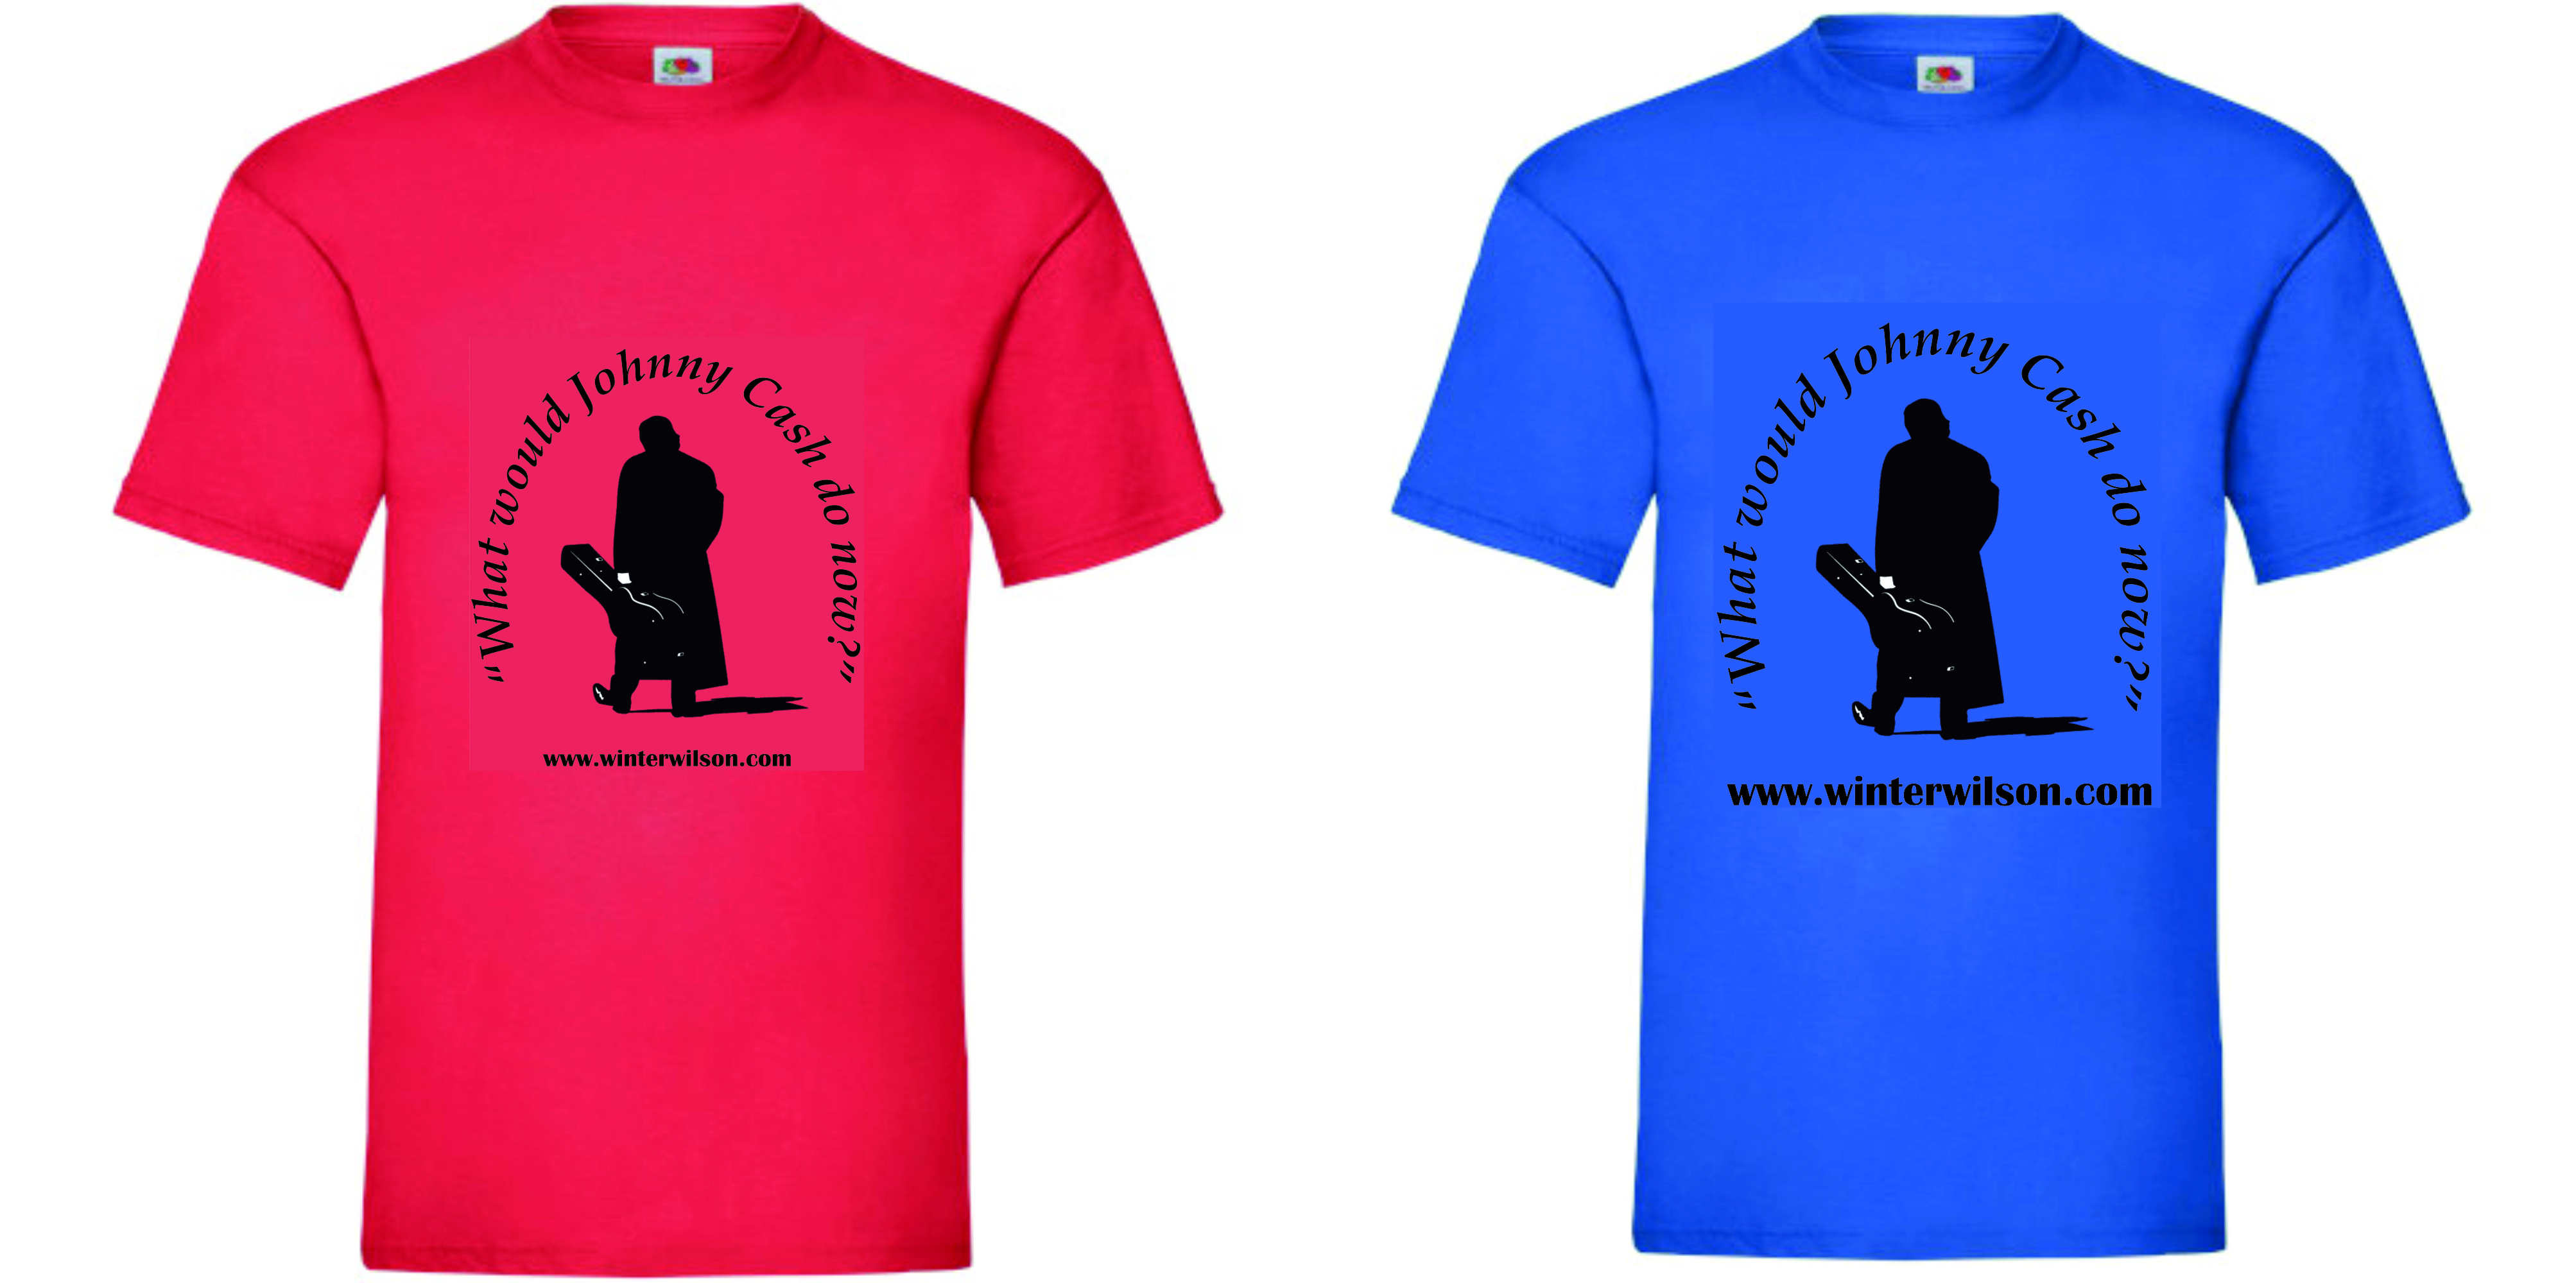 What would Johnny Cash do now t-shirts in red and blue